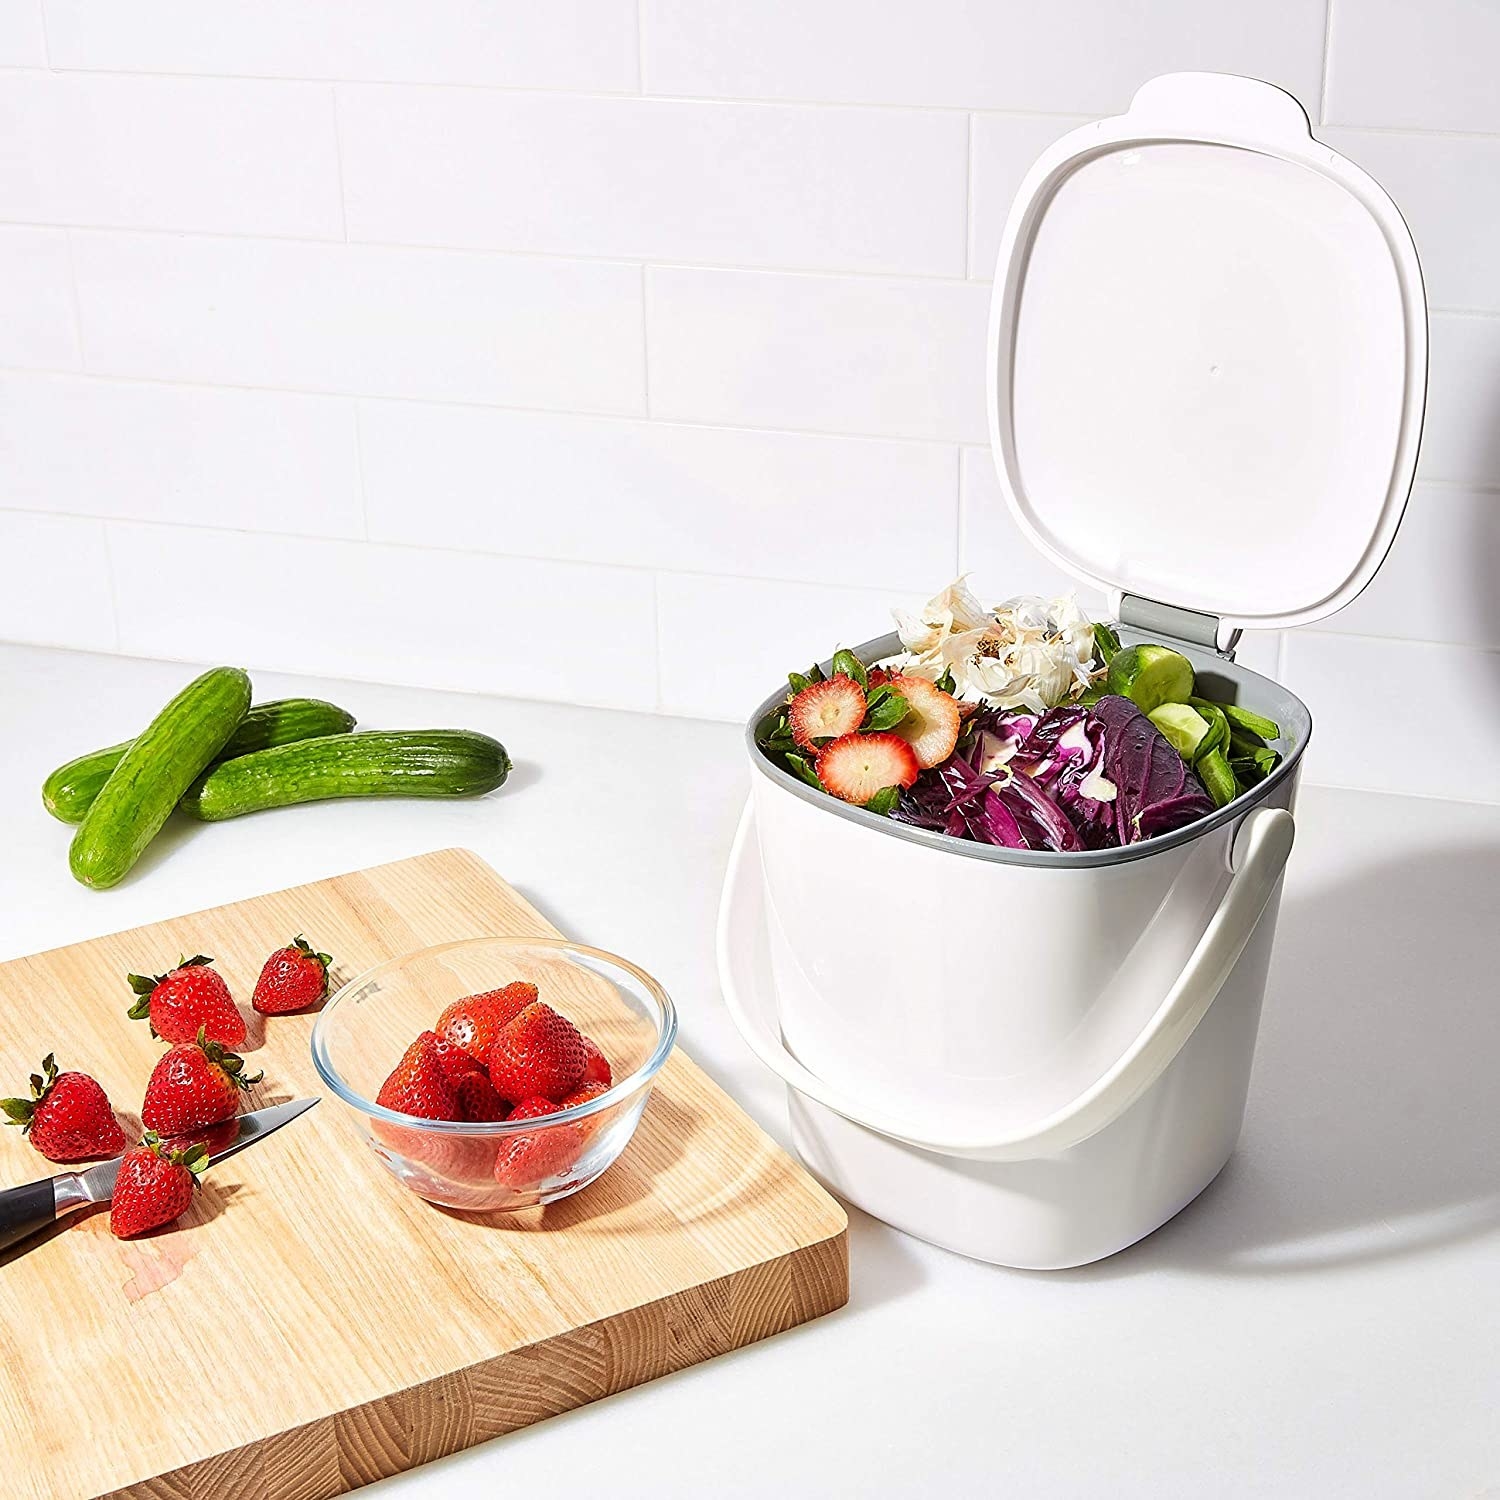 The small white compost bin with a handle and the lid open to show the food scraps inside